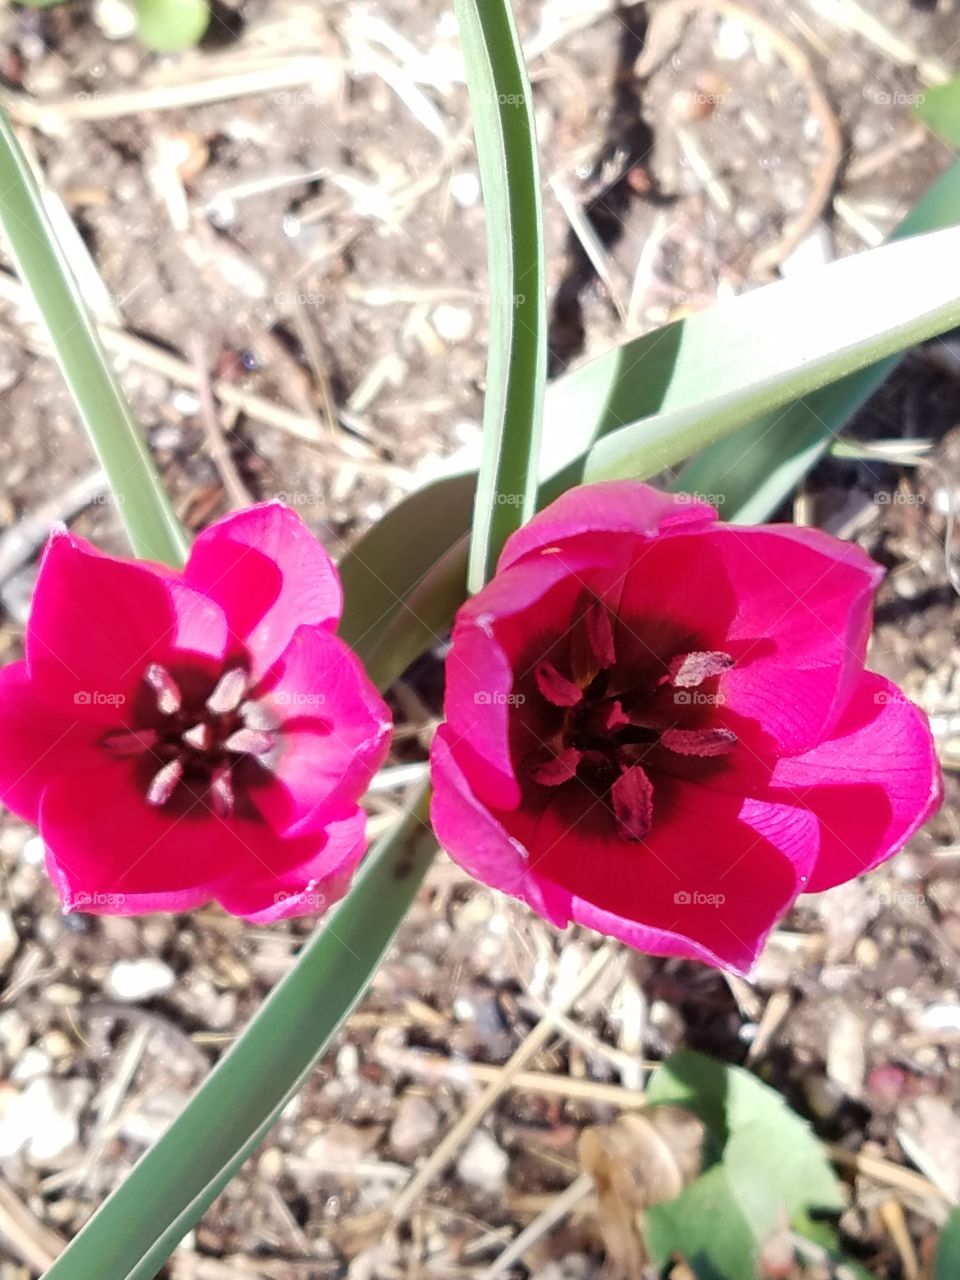 spring flowers are beginning to bloom in Albuquerque